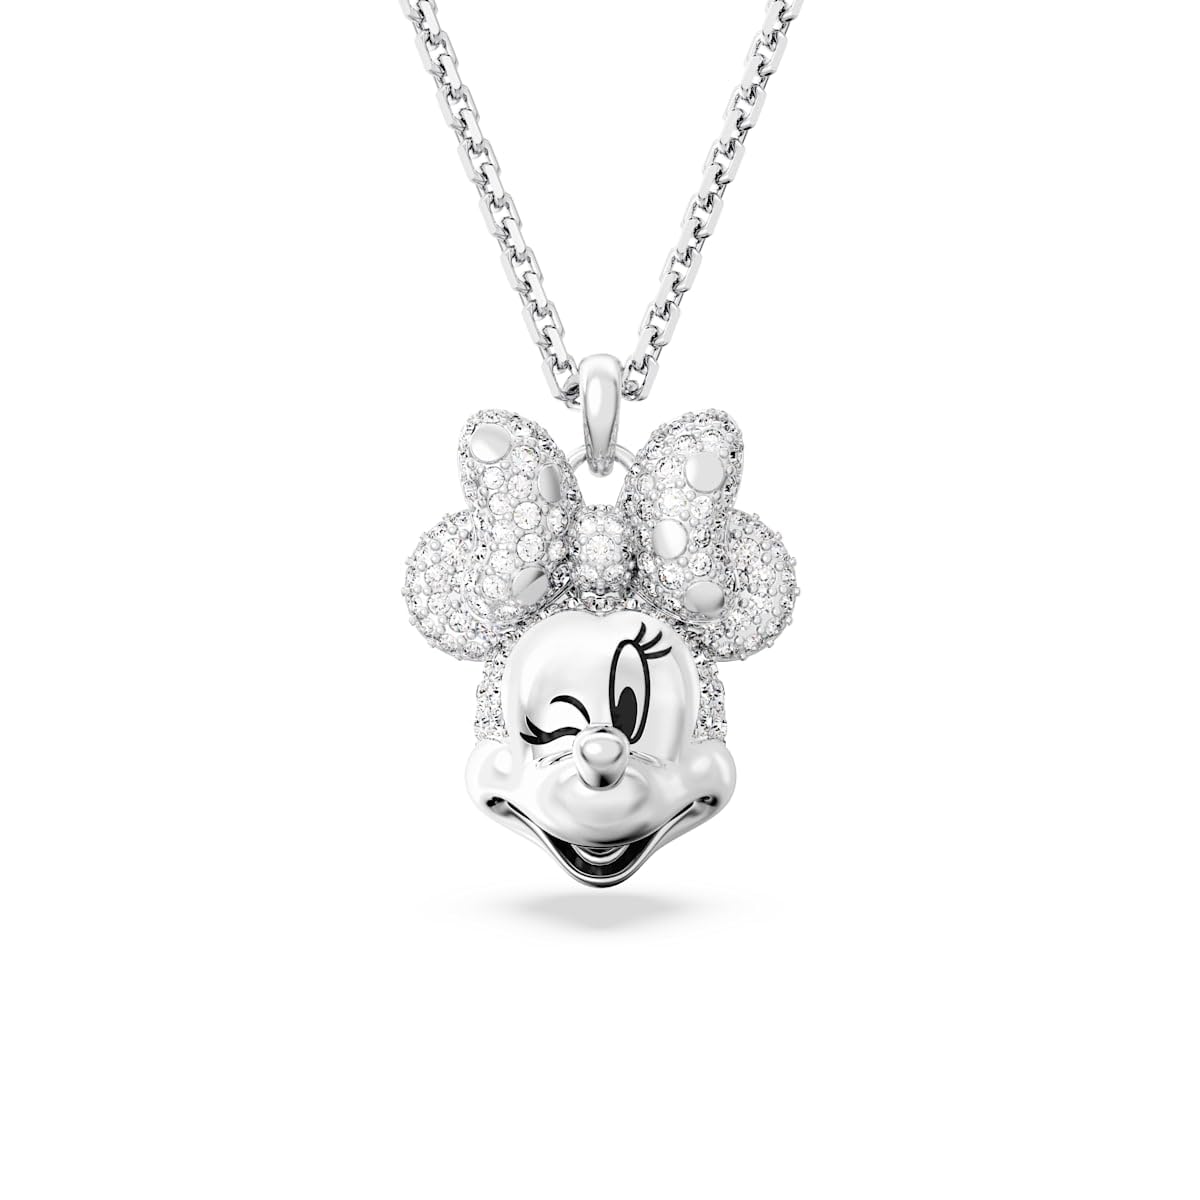 Swarovski Disney100 Pendant Necklace, Minnie Mouse Motif with Clear Pavé Crystals in a Rhodium Finished Setting, Part of the Disney100 Collection